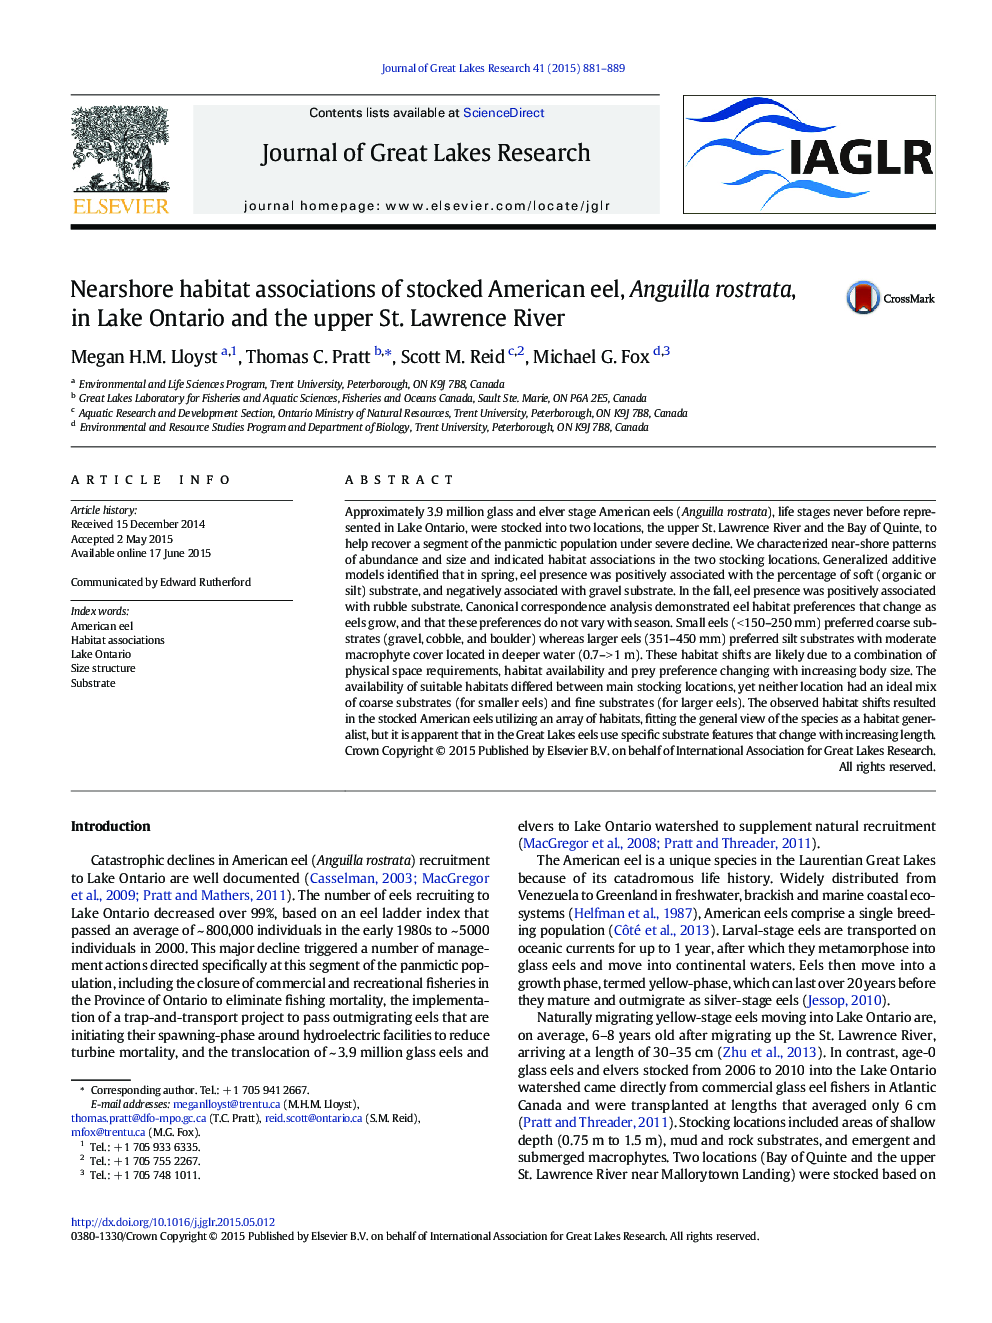 Nearshore habitat associations of stocked American eel, Anguilla rostrata, in Lake Ontario and the upper St. Lawrence River